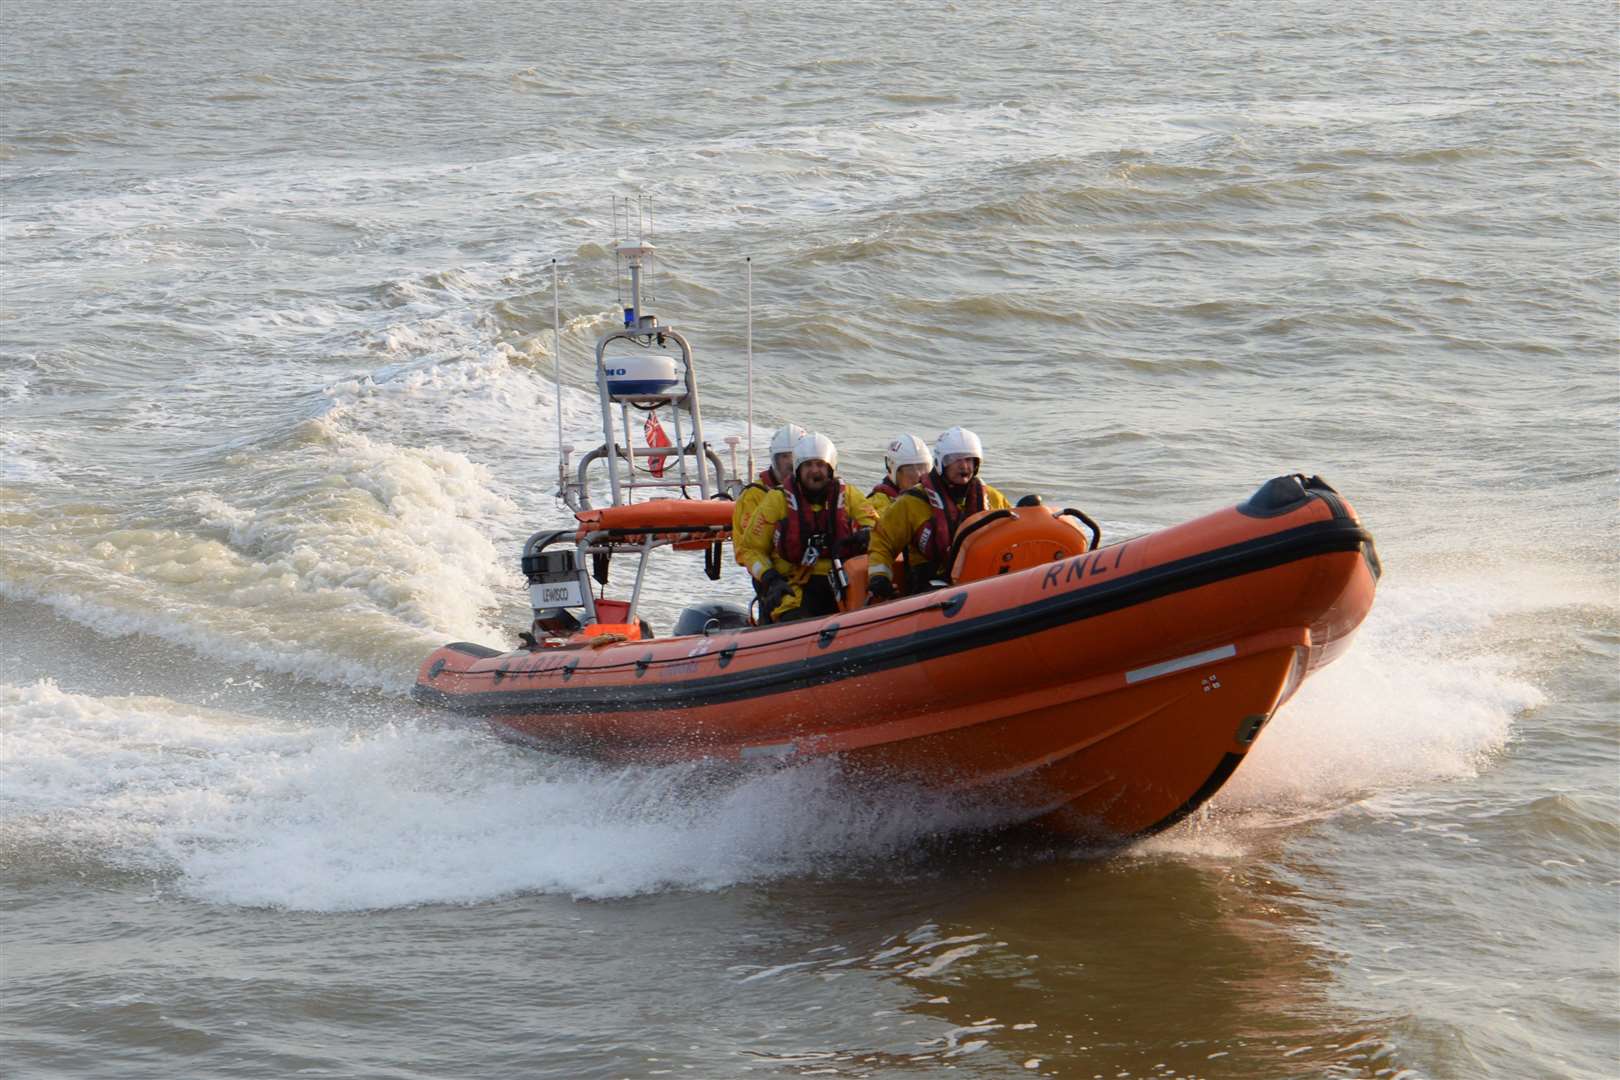 The RNLI and coastguard were called to rescue stranded walkers. Stock image